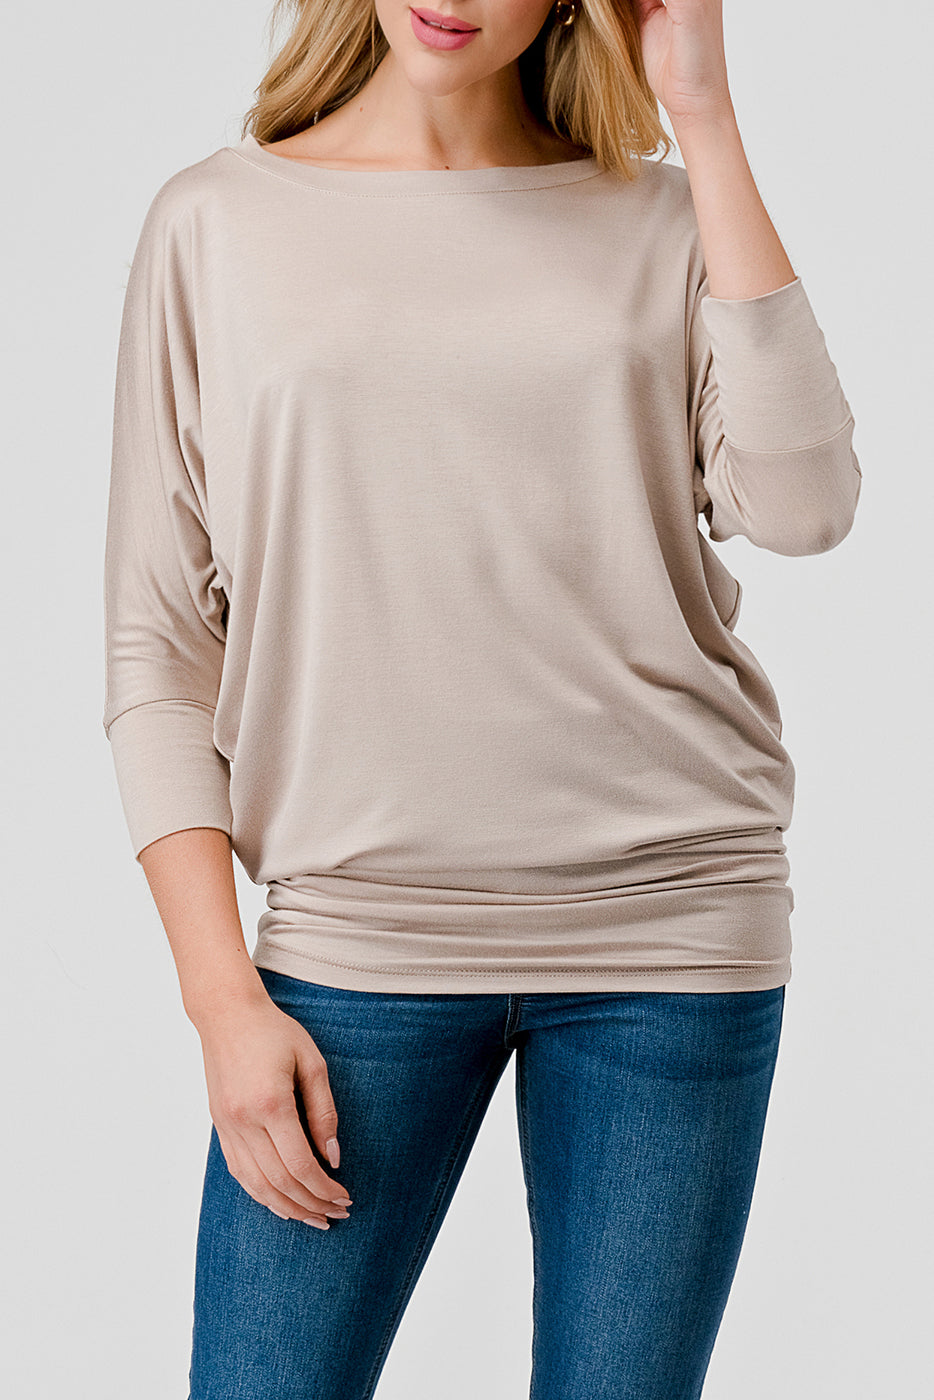 Comfy Modal 3/4 Dolman Sleeve Top in Light Taupe color. Available at Kadou Boutique. Free shipping.